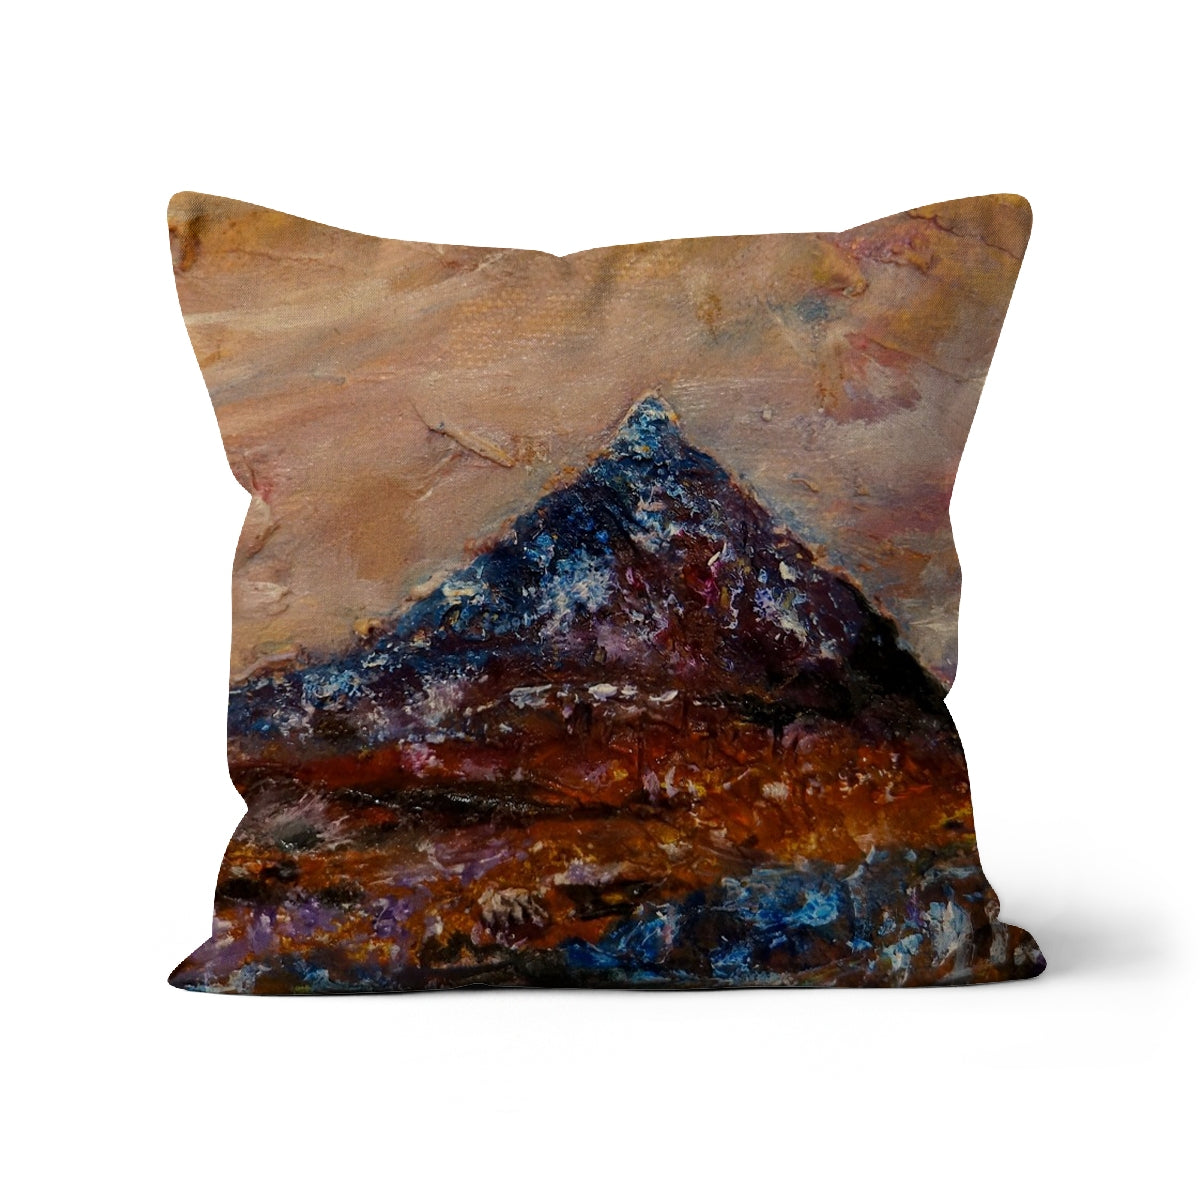 Buachaille Etive Mòr Art Gifts Cushion-Cushions-Glencoe Art Gallery-Faux Suede-18"x18"-Paintings, Prints, Homeware, Art Gifts From Scotland By Scottish Artist Kevin Hunter